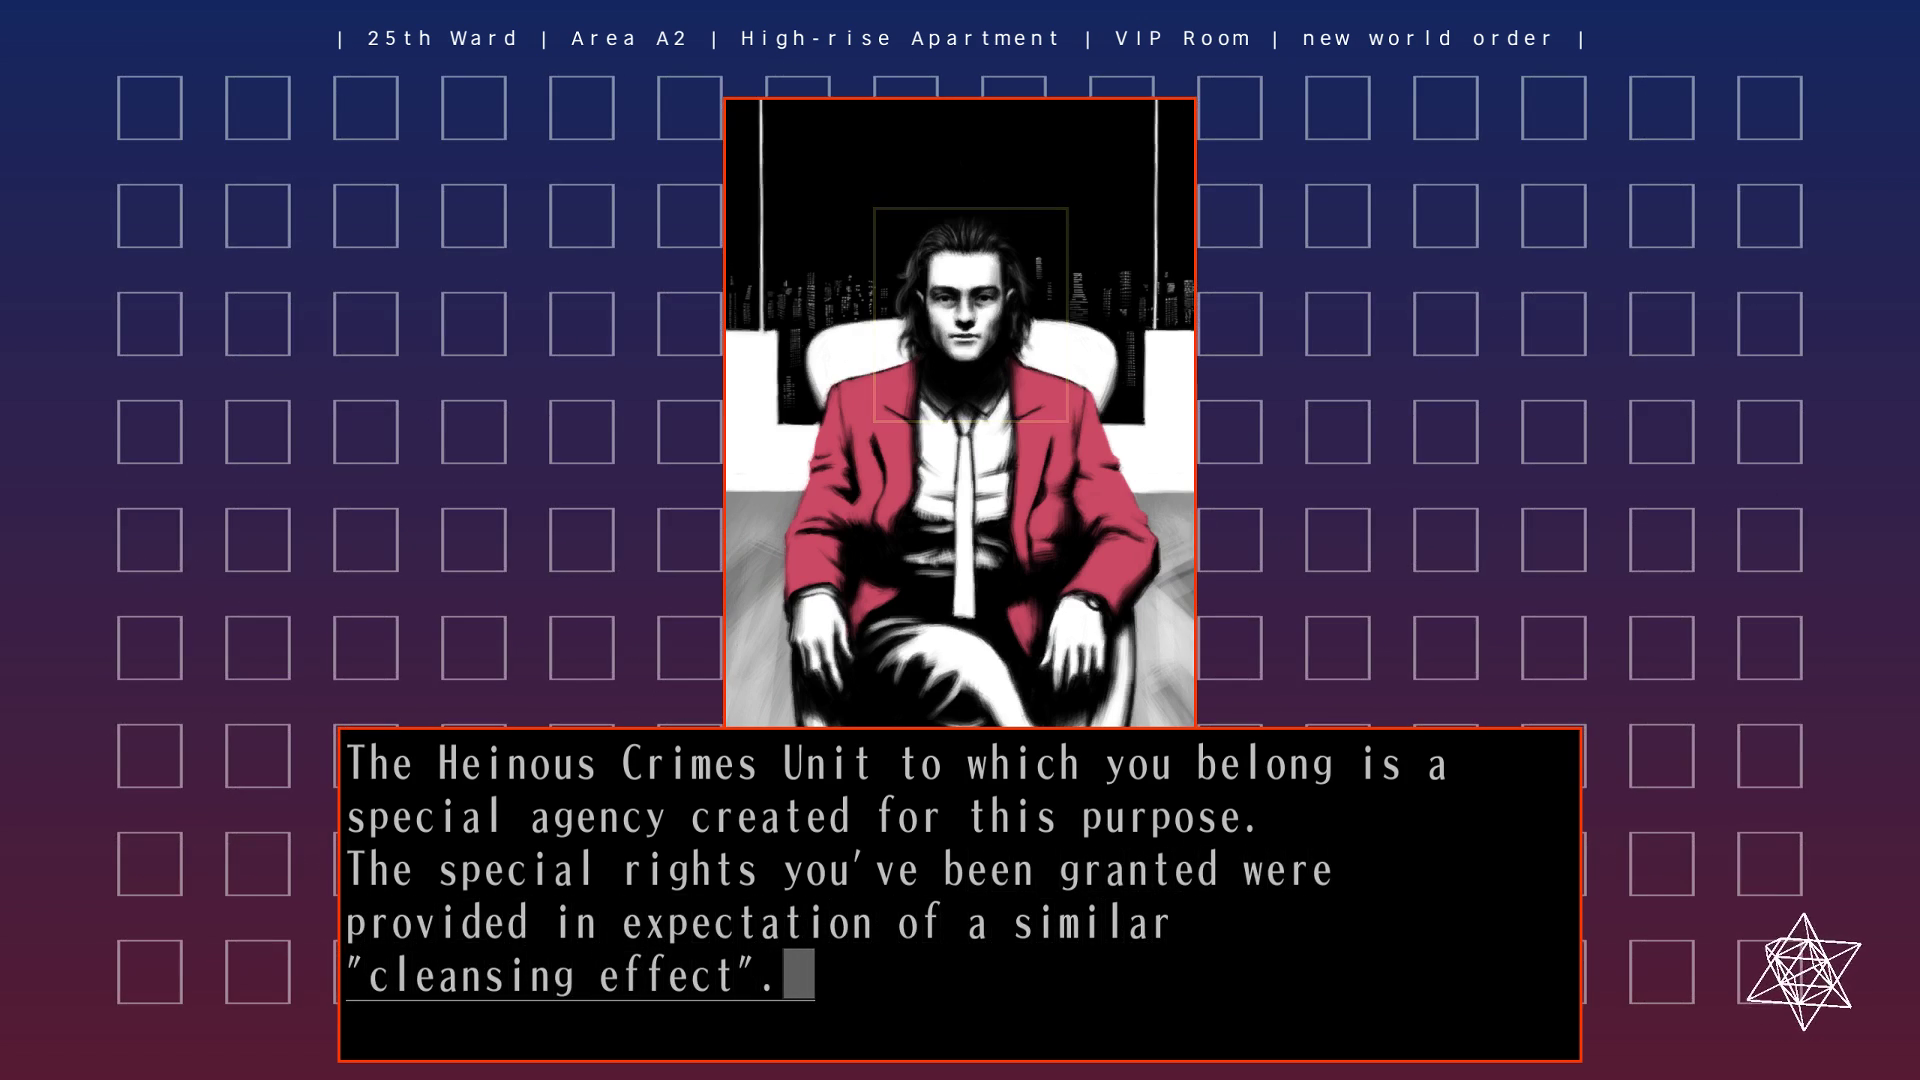 Screenshot of "new world order." Nakane Kinshiro says, "The Heinous Crimes Unit to which you belong is a special agency created for this purpose. The special rights you've been granted were provided in expectation of a similar 'cleansing effect'."